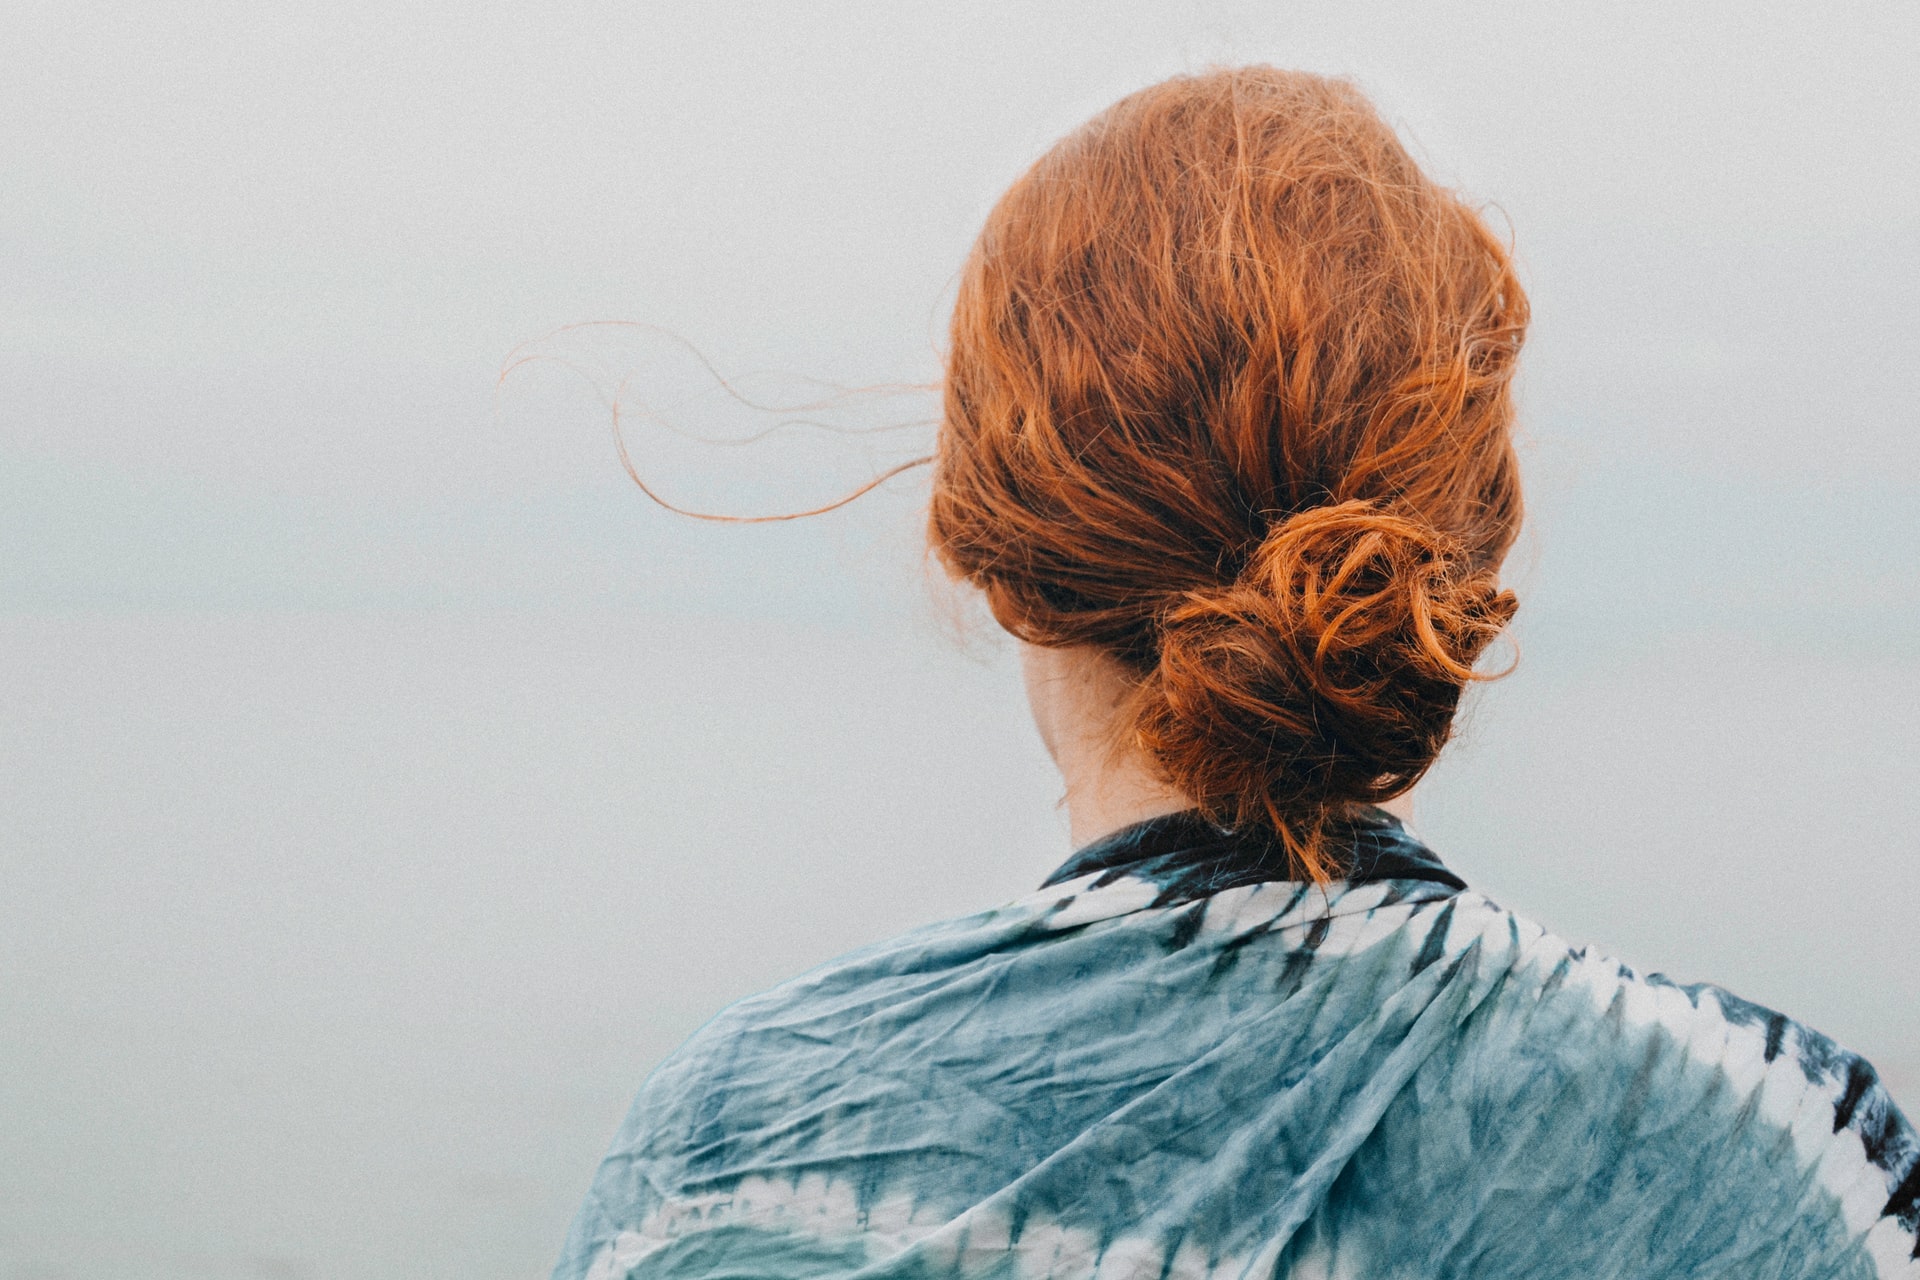 tyler mcrobert Rn0rzGxPedM unsplash - 6 Tips To Stop Frizzy Hair From The Roots Up